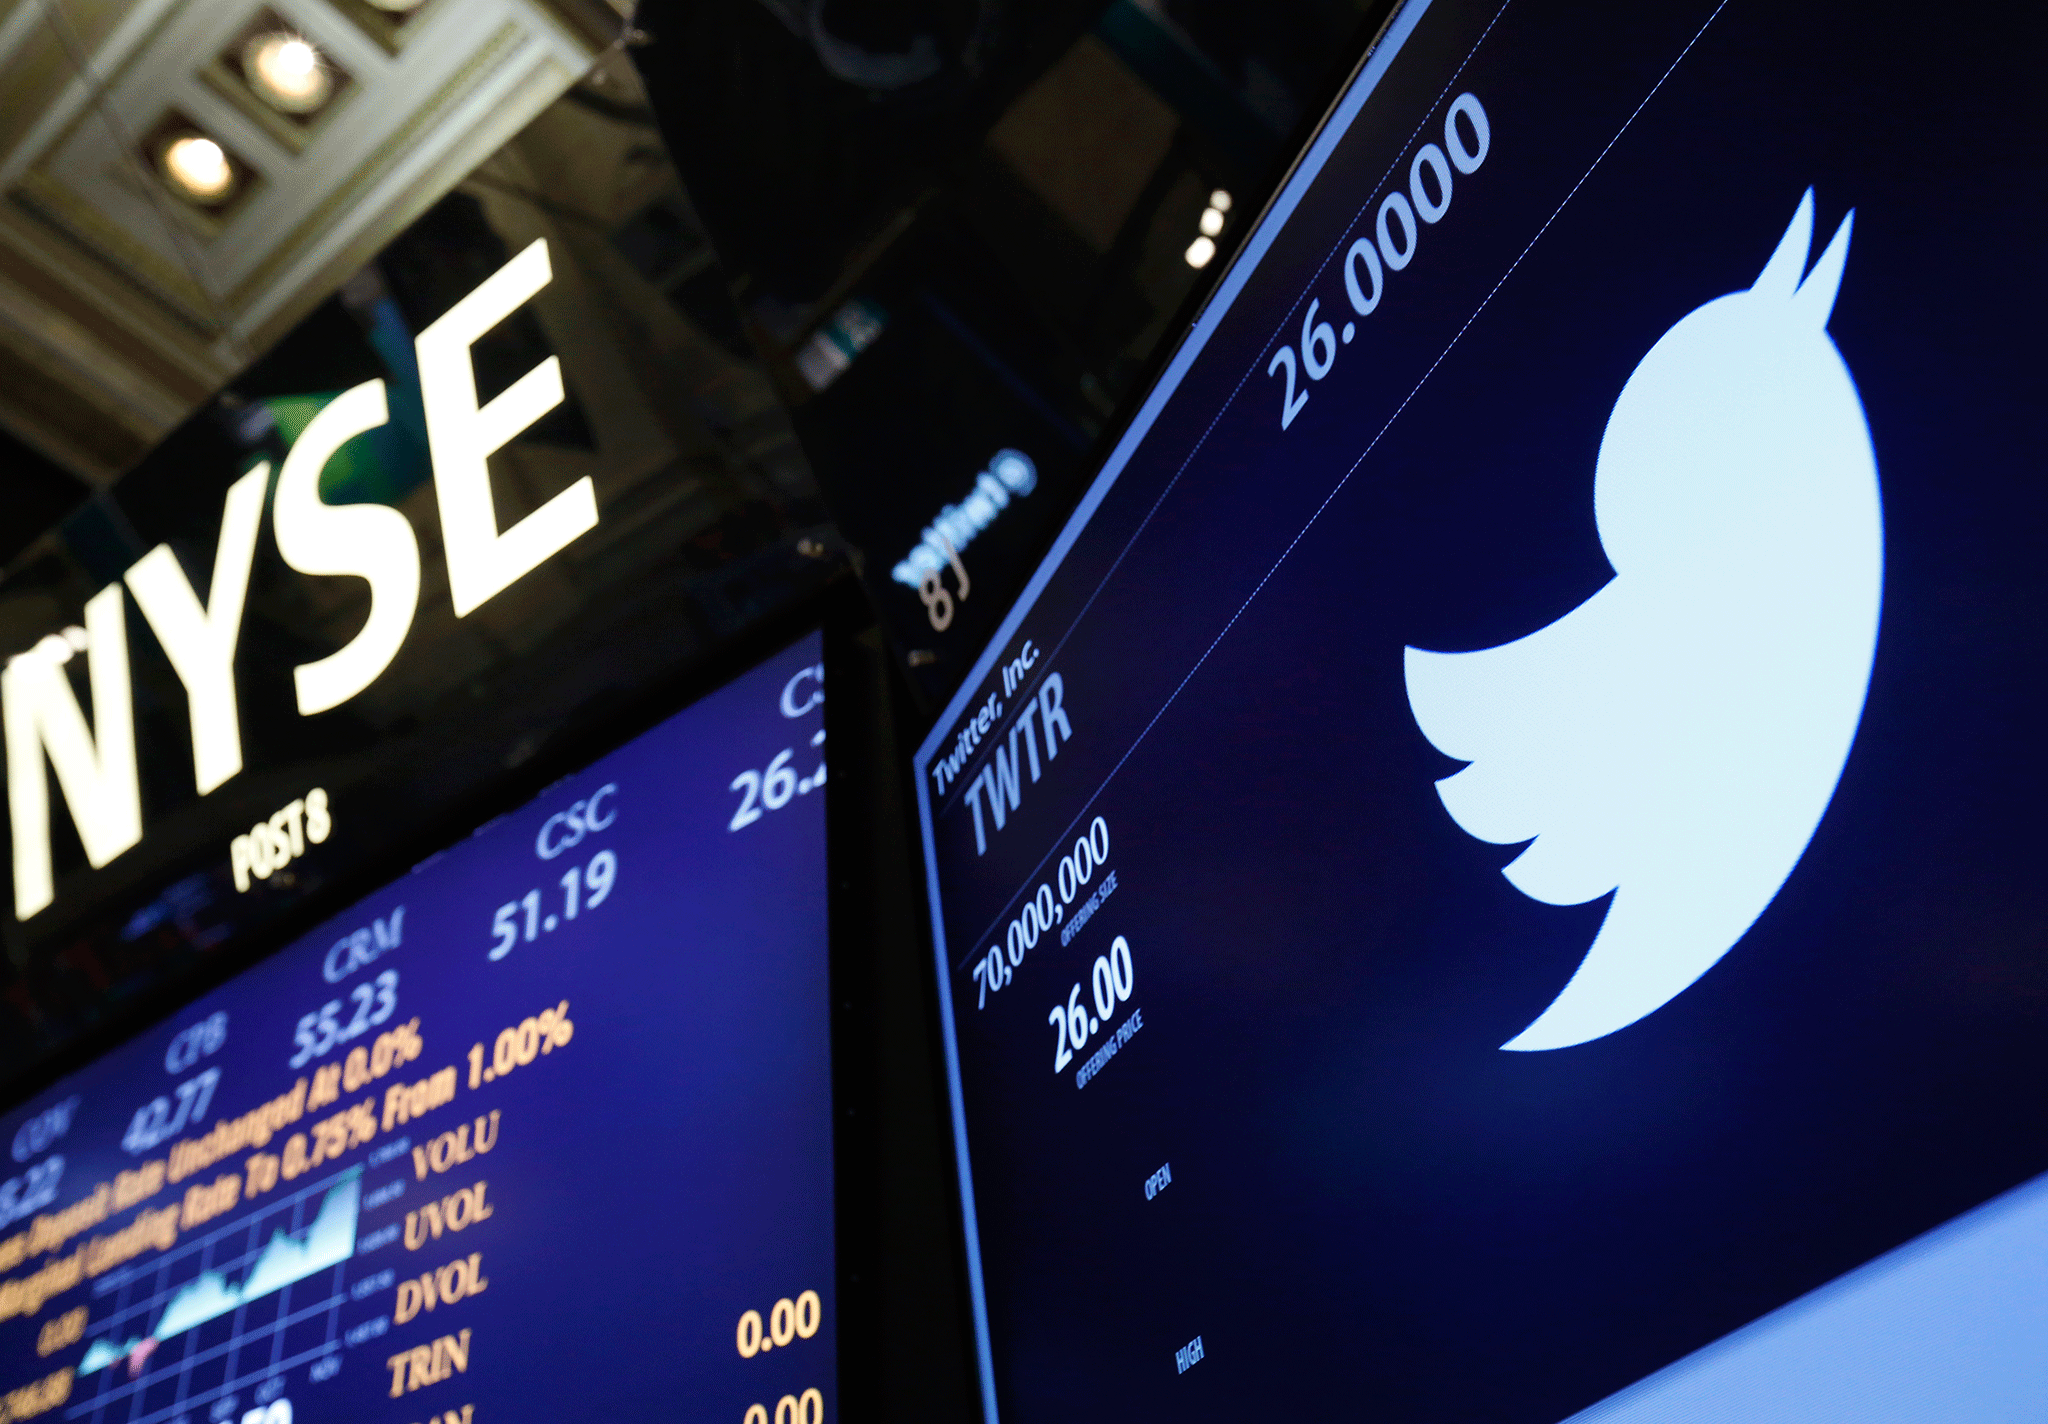 Twitter shares plummet as Apple, Google and Disney 'unlikely' to bid, report says